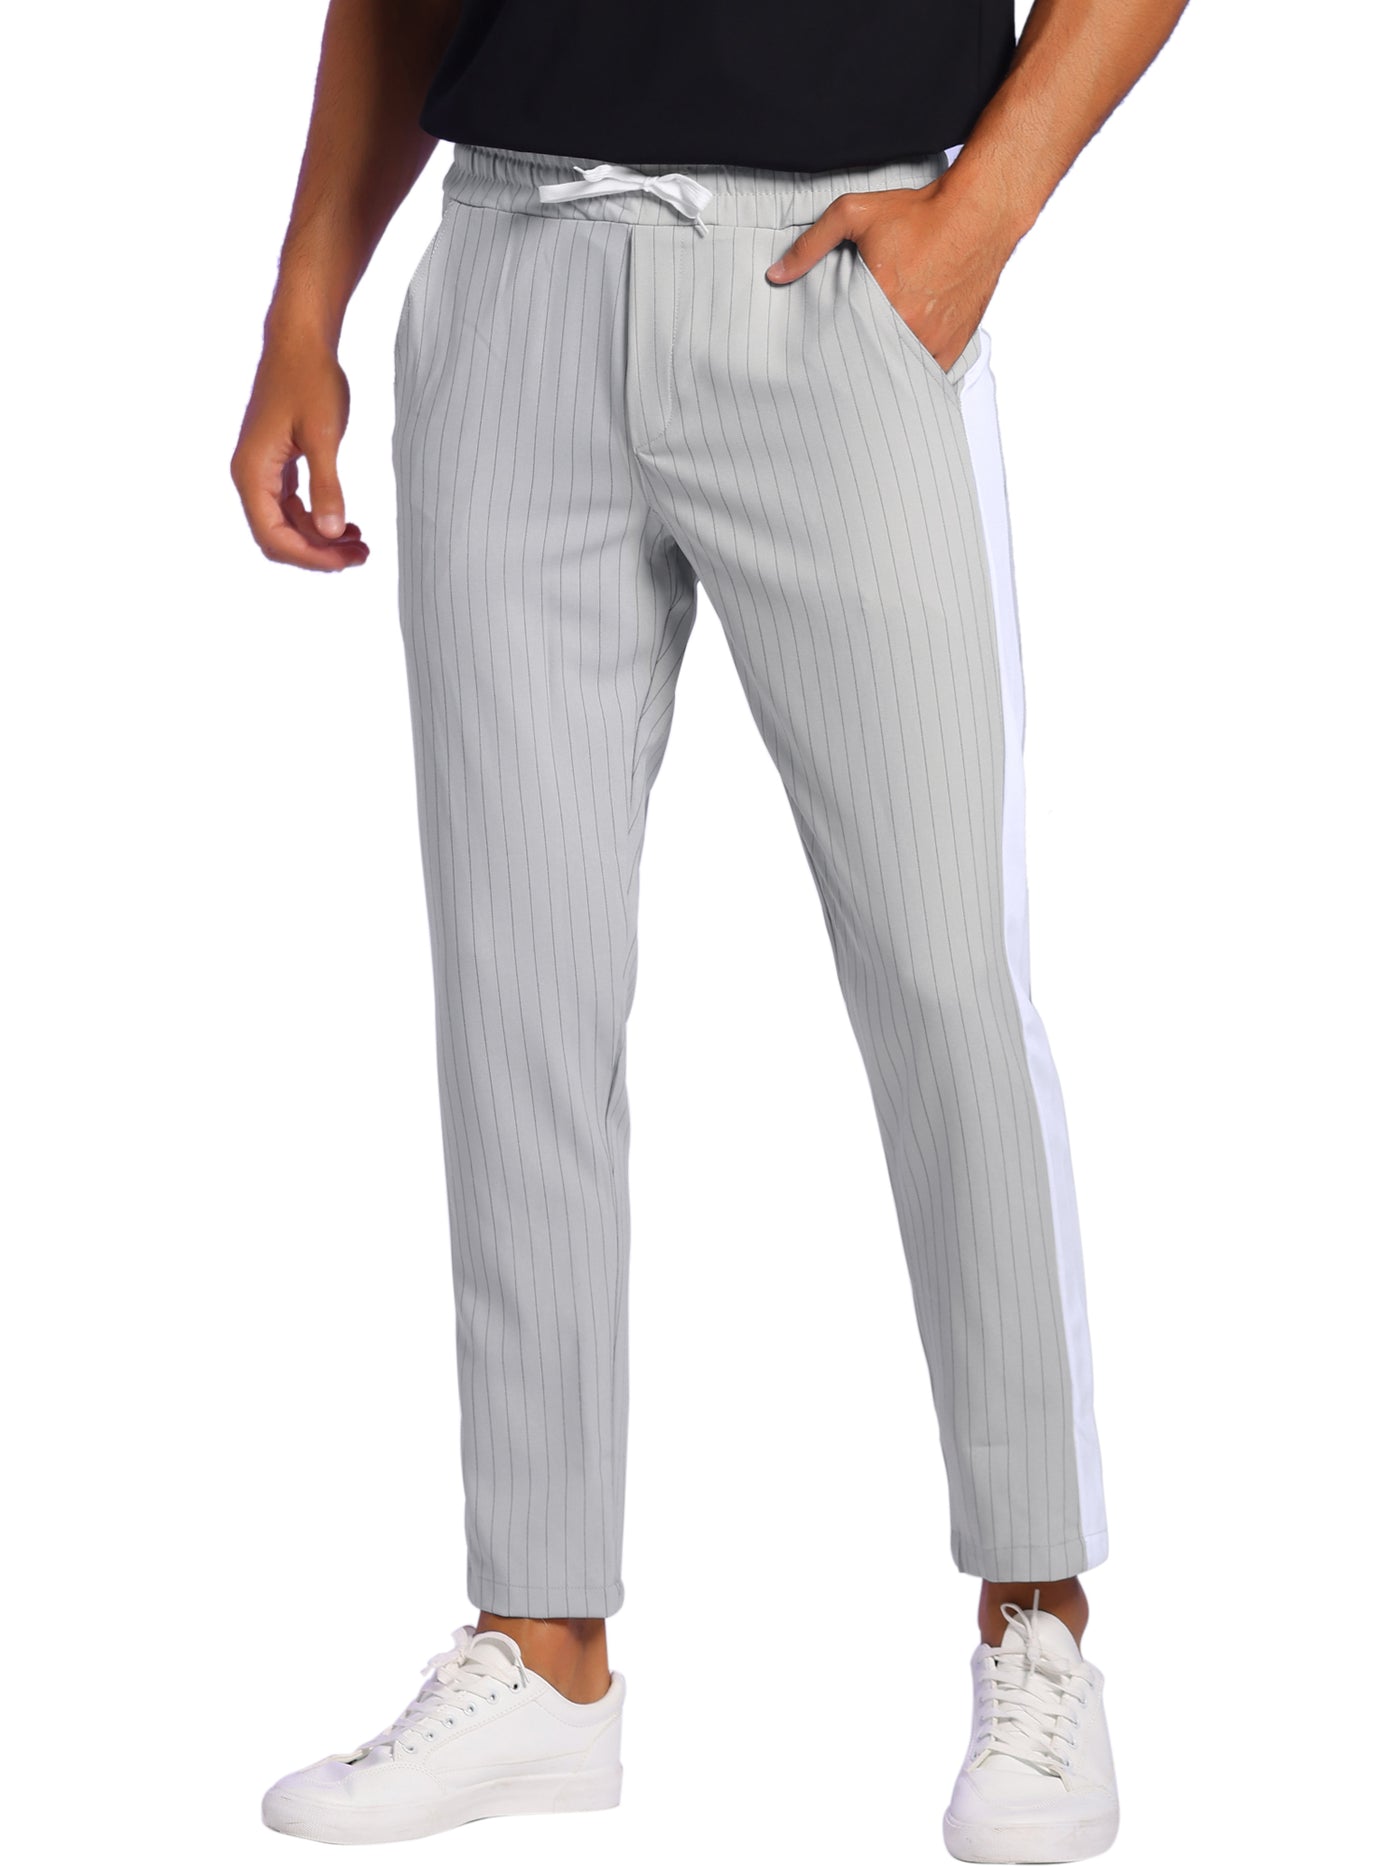 Bublédon Men's Striped Pants Drawstring Waist Contrast Color Tapered Trousers